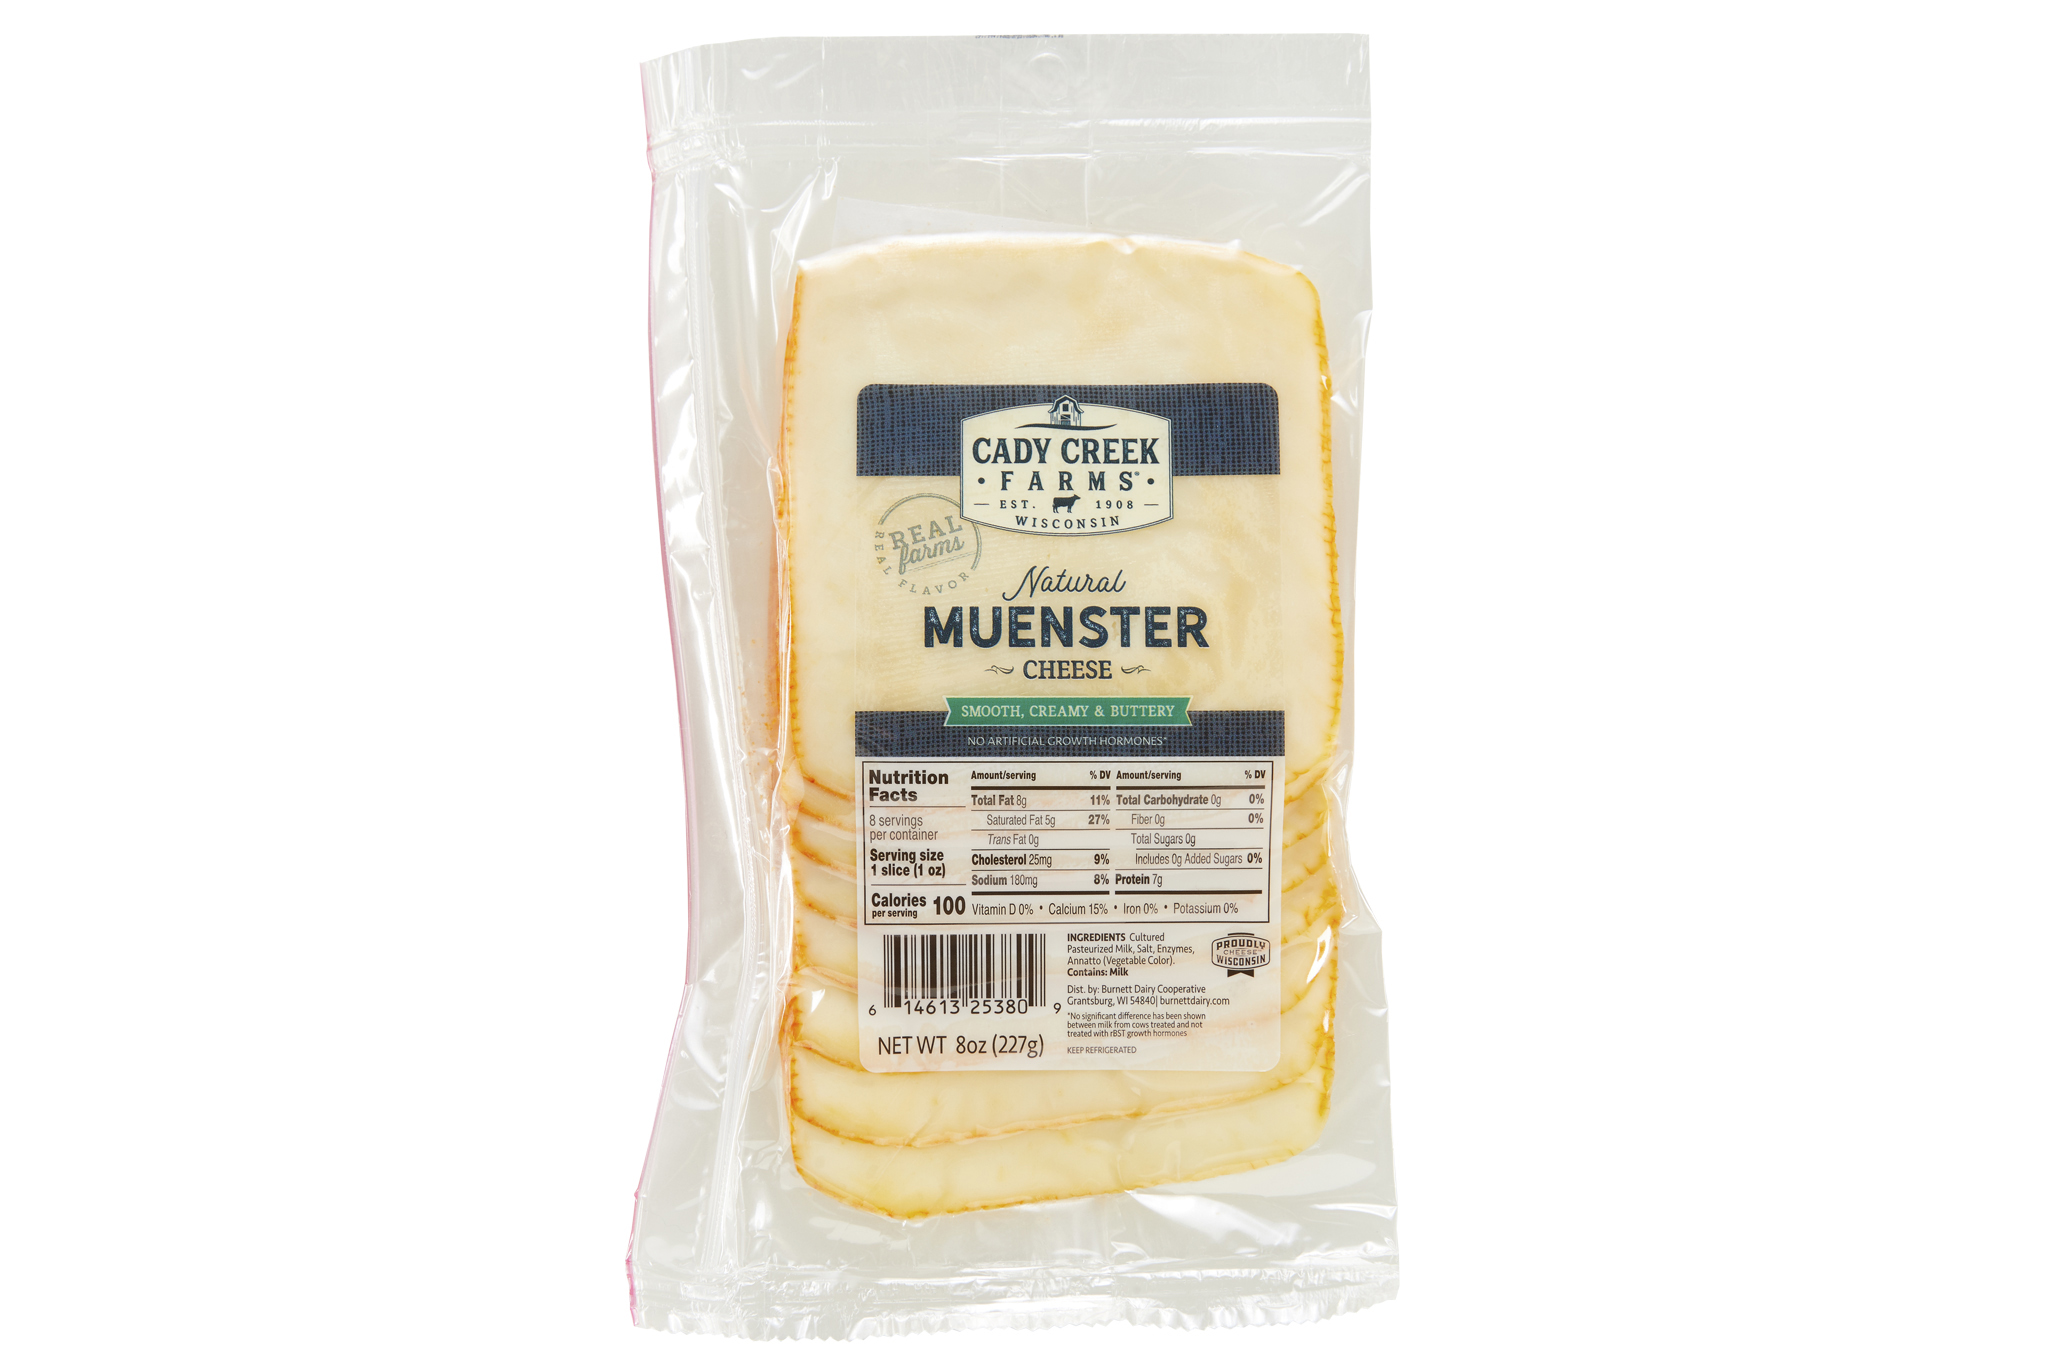 Cady Creek Farms 8 oz Muenster slices in package